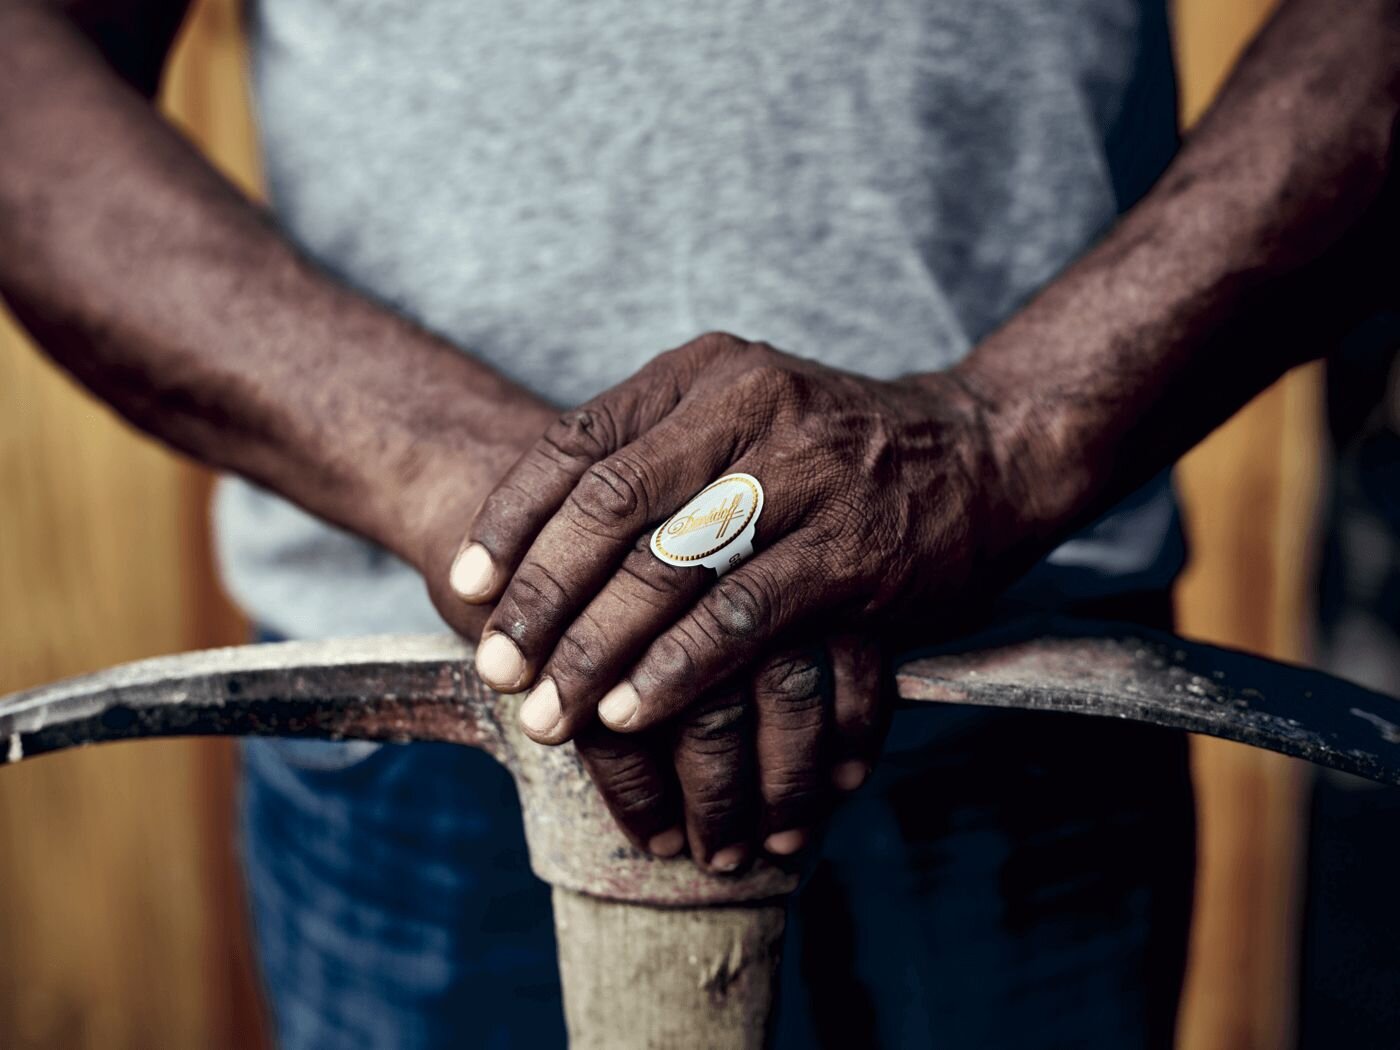 Davidoff Difference Image of a farmer leaning his hands on a pickaxe with a Davidoff white band ring on the ring finger.